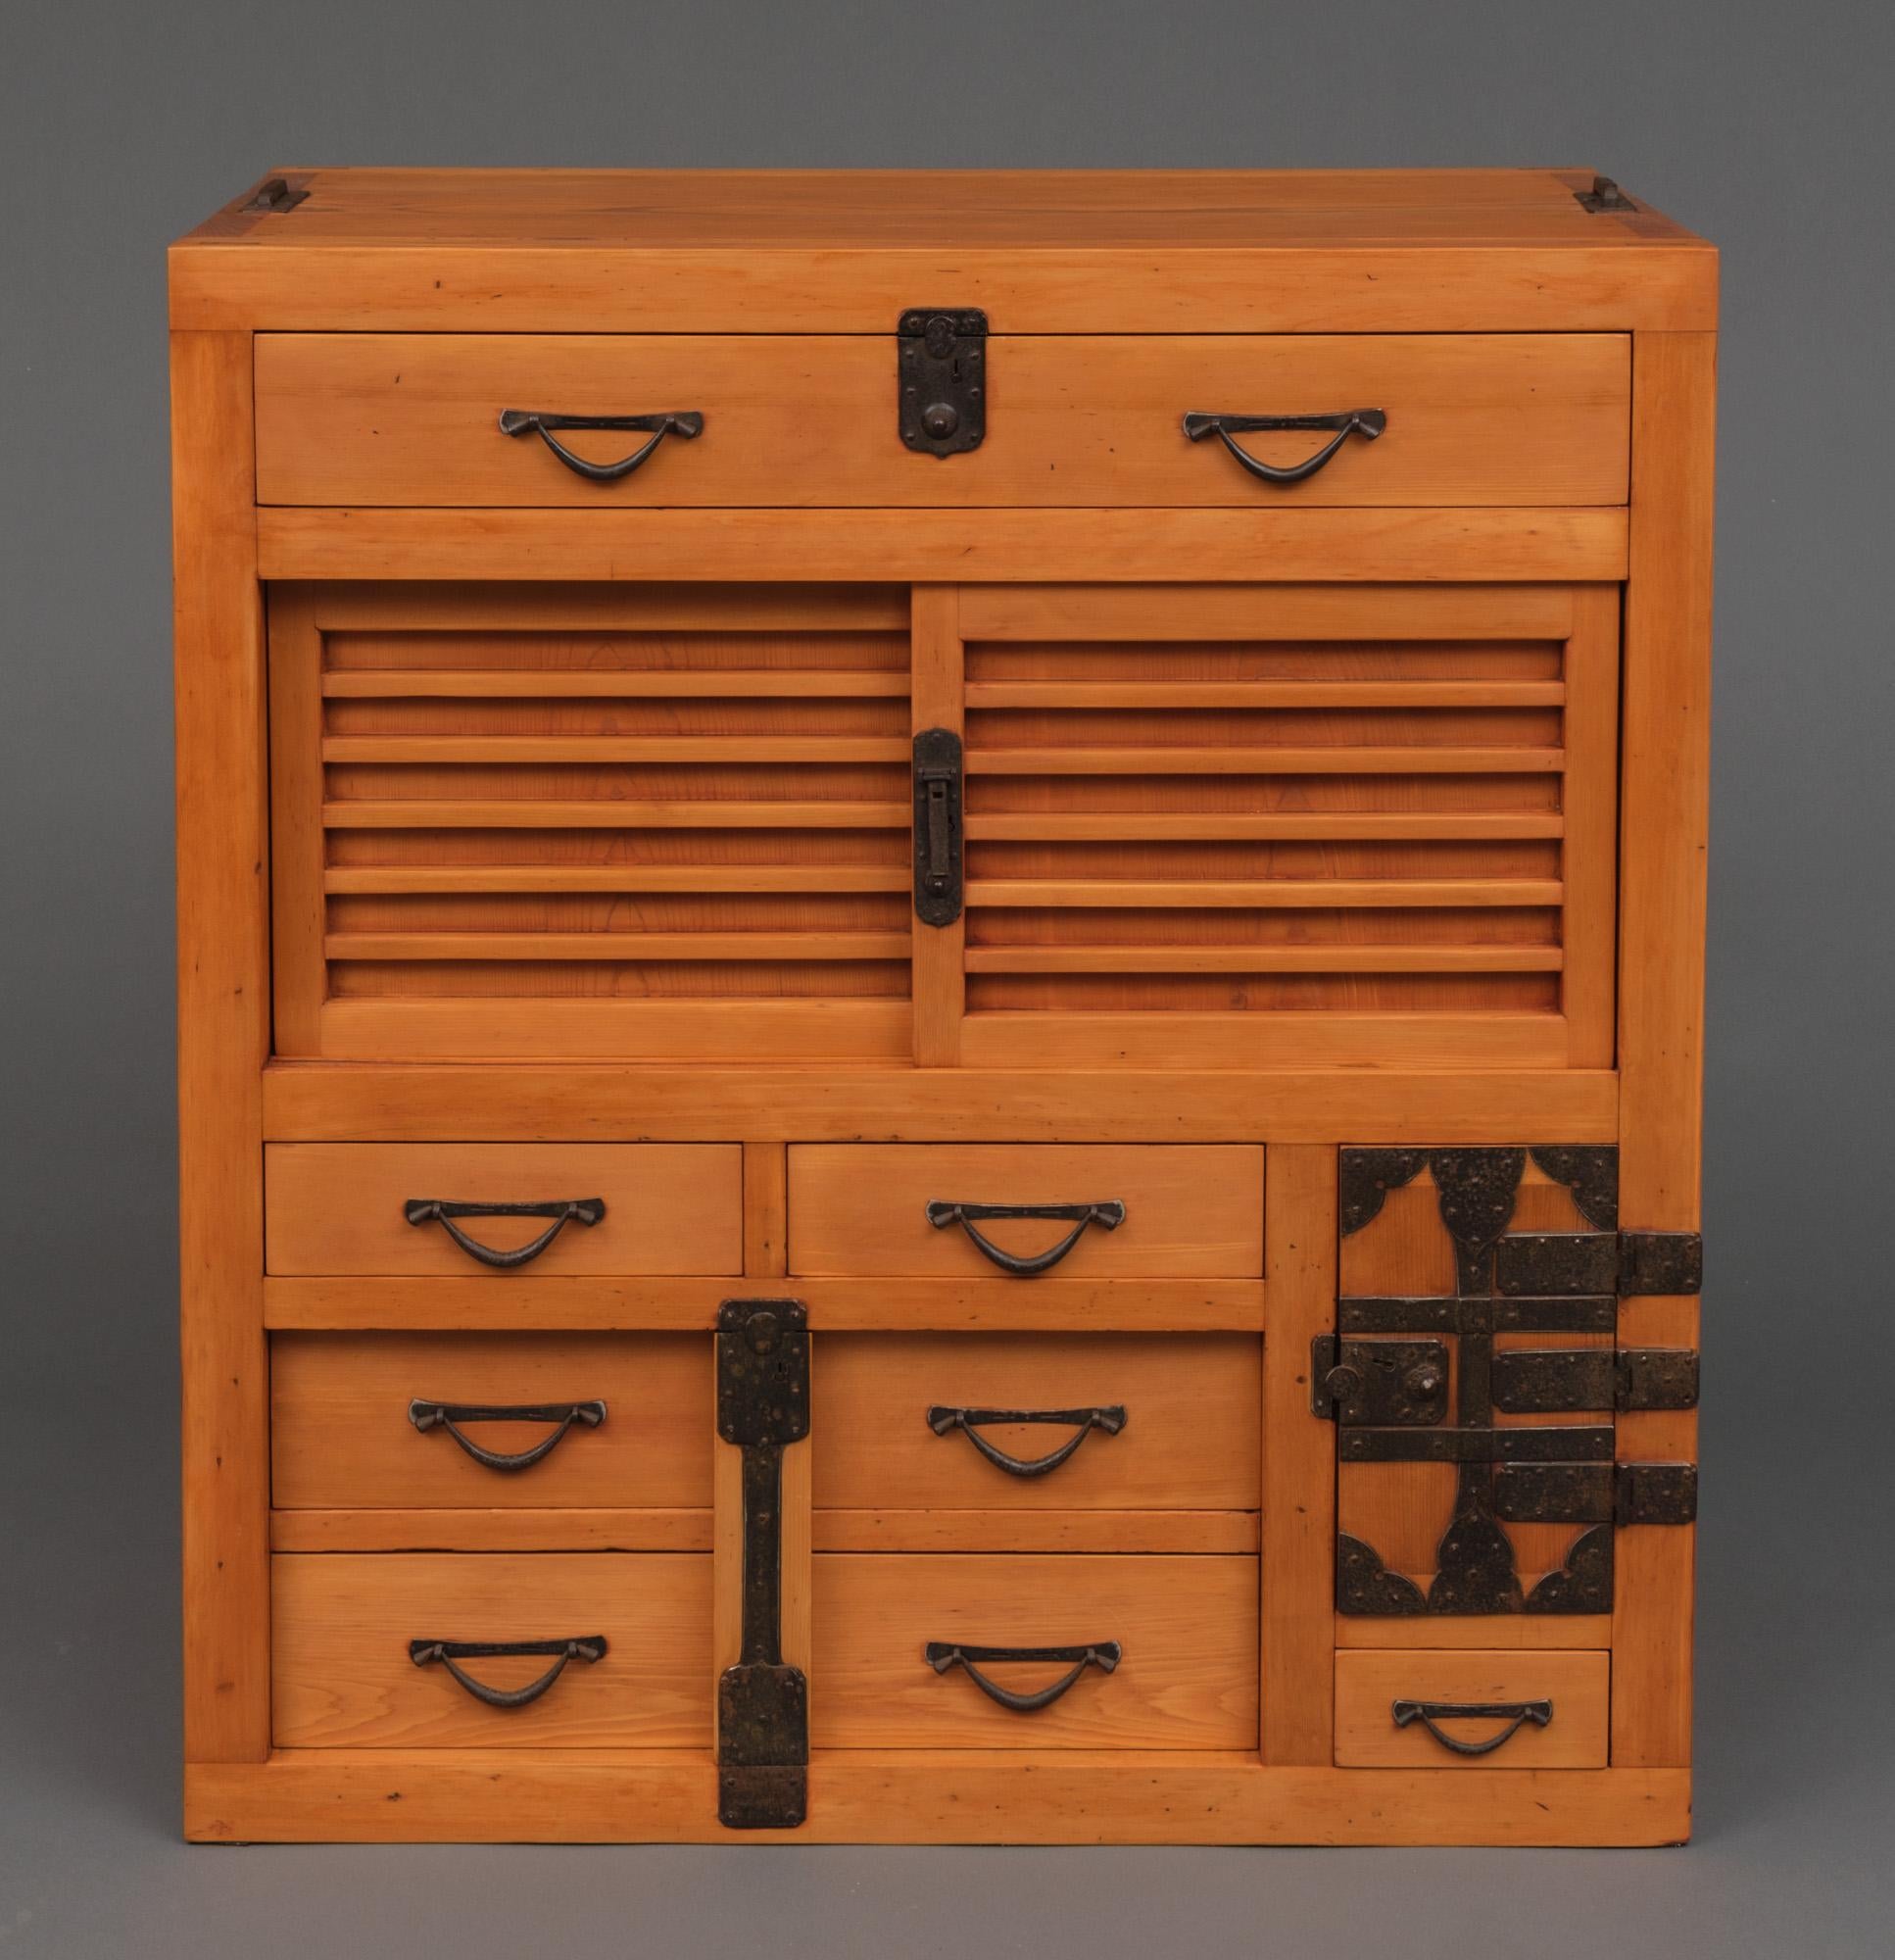 Amazing wooden Gifu chôba’dansu (merchant's document cabinet) with sturdy iron hardware and a well-hidden secret compartment. Fully restored, cleaned and waxed.

Made of indigenous sugi (cedar) and hinoki (cypress) wood varnished in a sought after